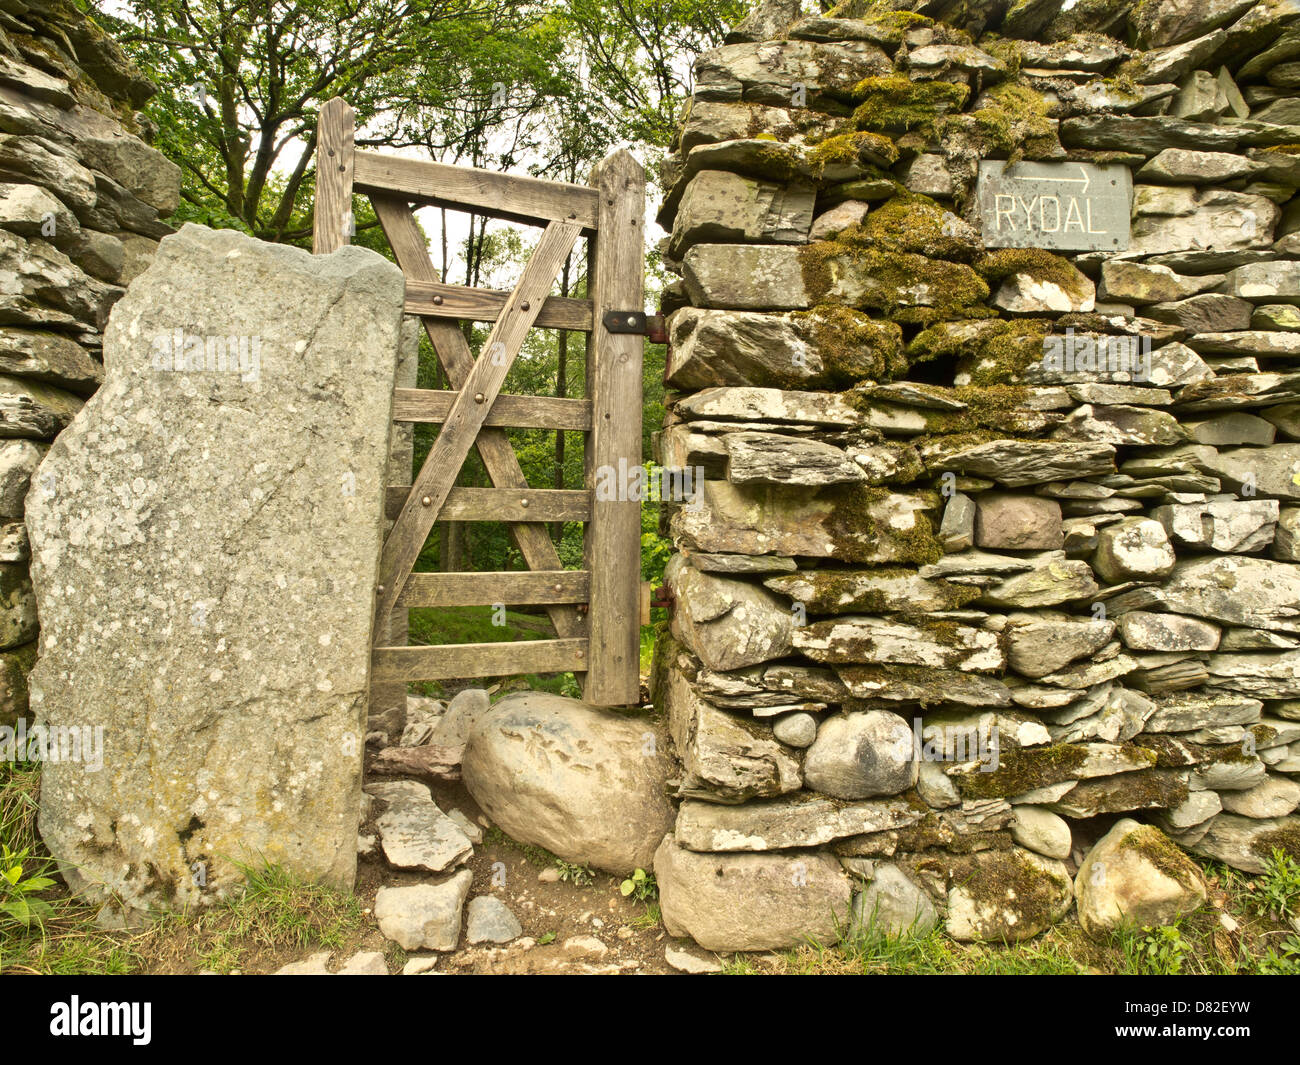 Hedge made as Dry stone wall with a gate at Ridal popular holiday distortion in Lake District, Cumbria, UK Stock Photo